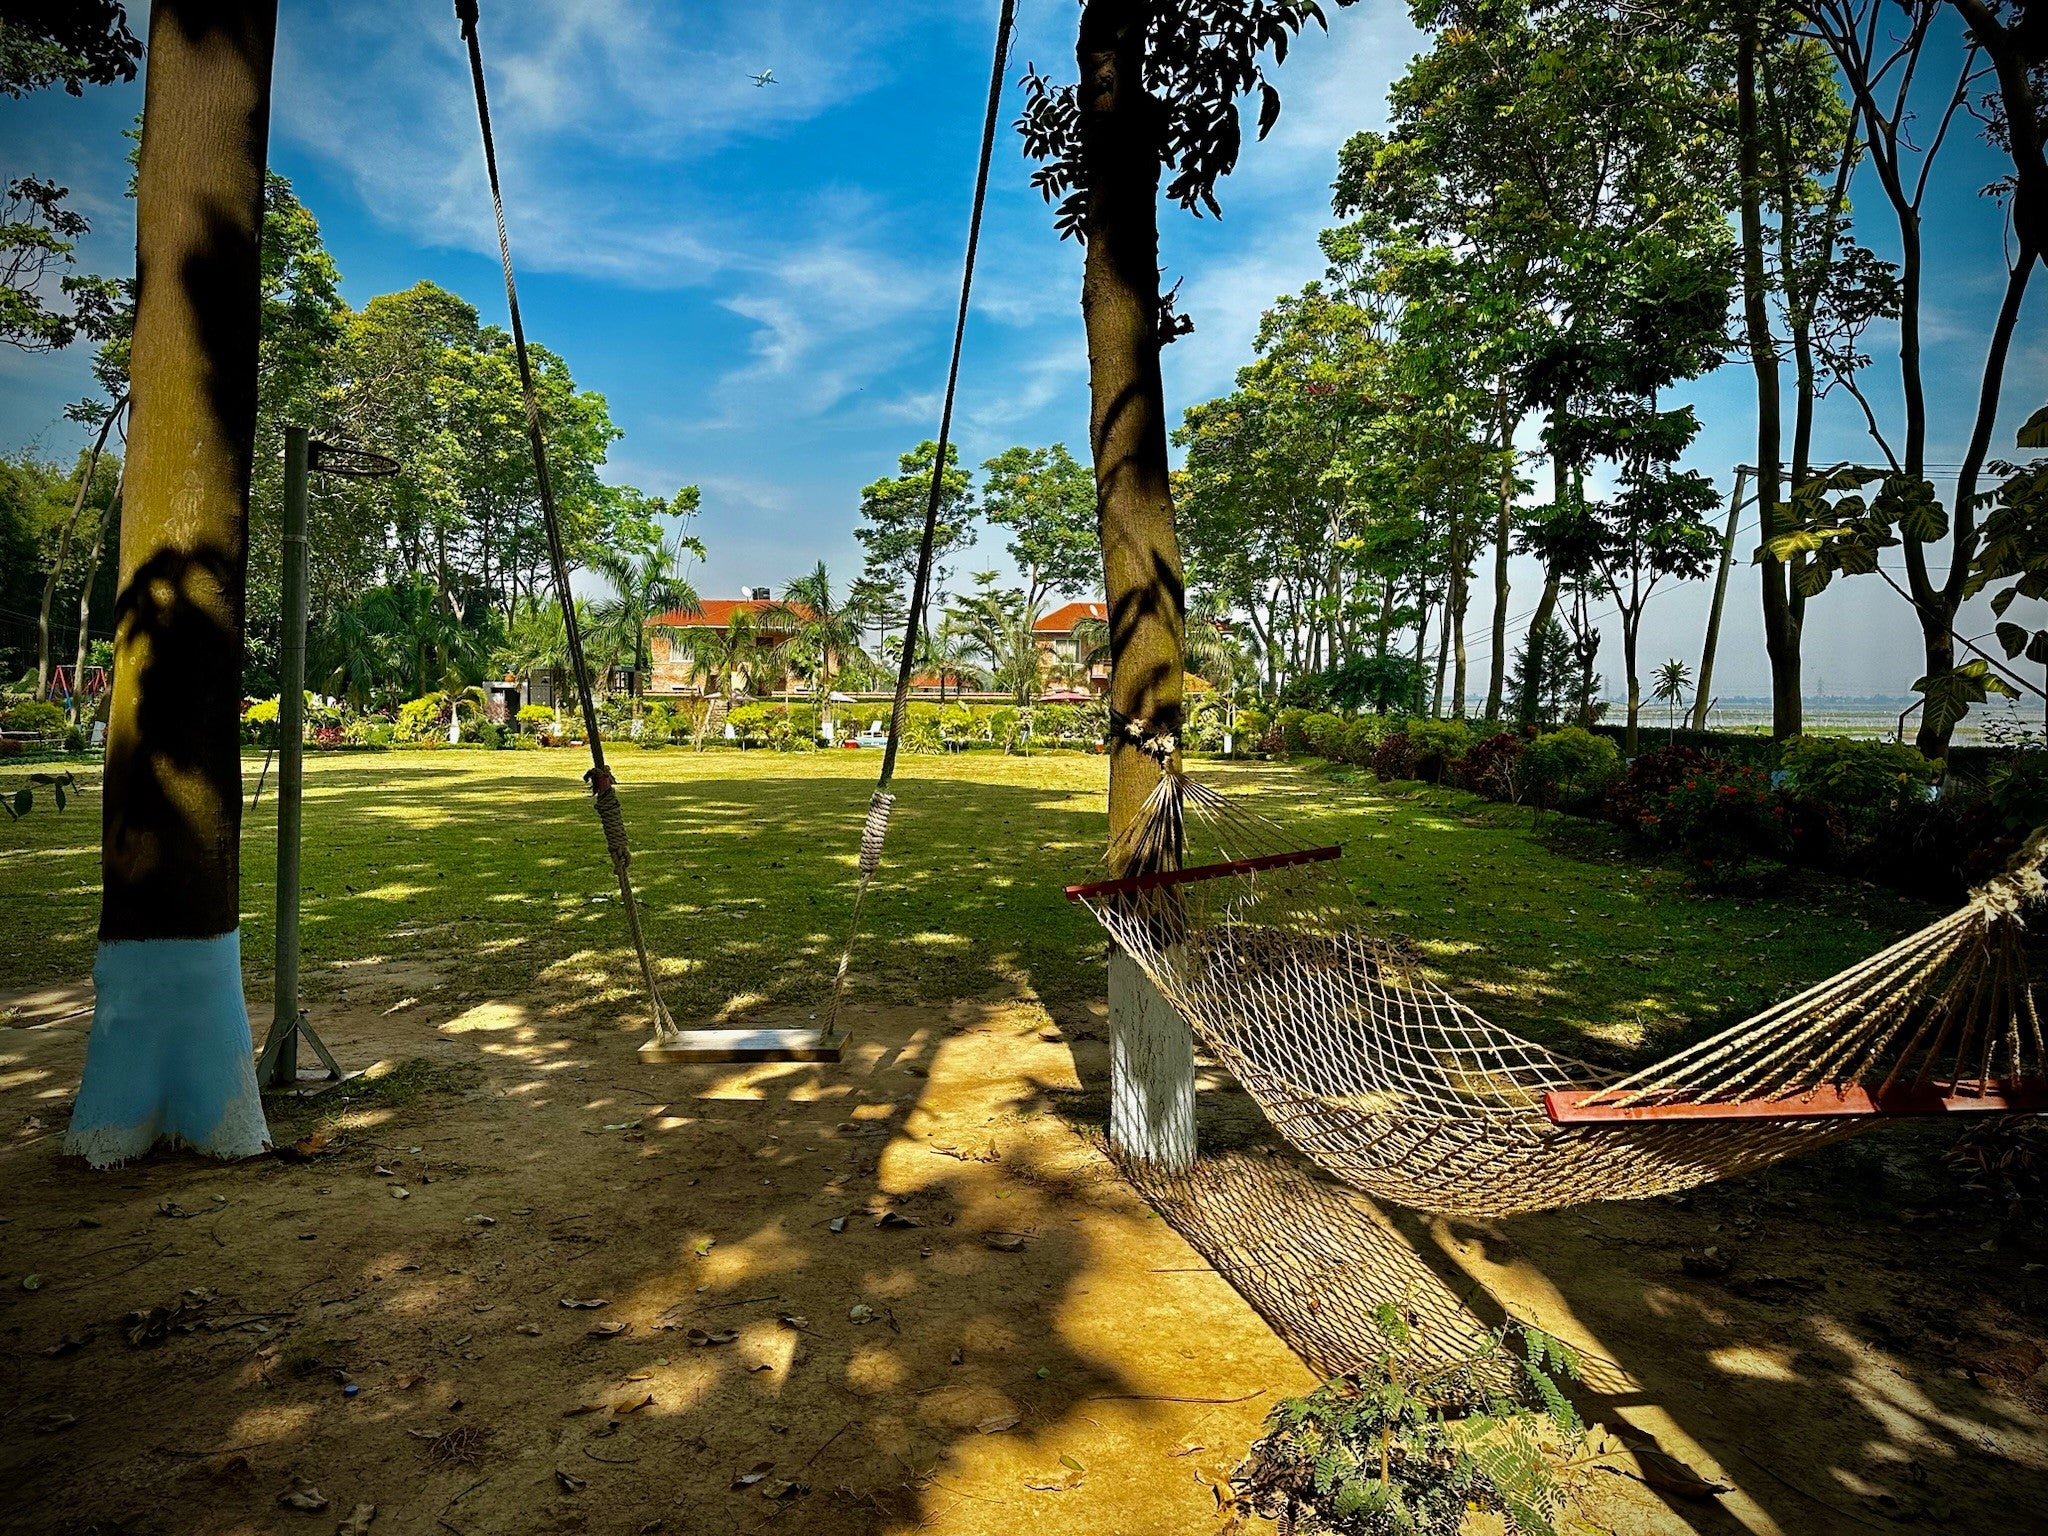 Relaxing hammock and swing set in the peaceful garden area of Barnochata, a resort and Dhaka hotel in Savar, inviting guests to unwind.